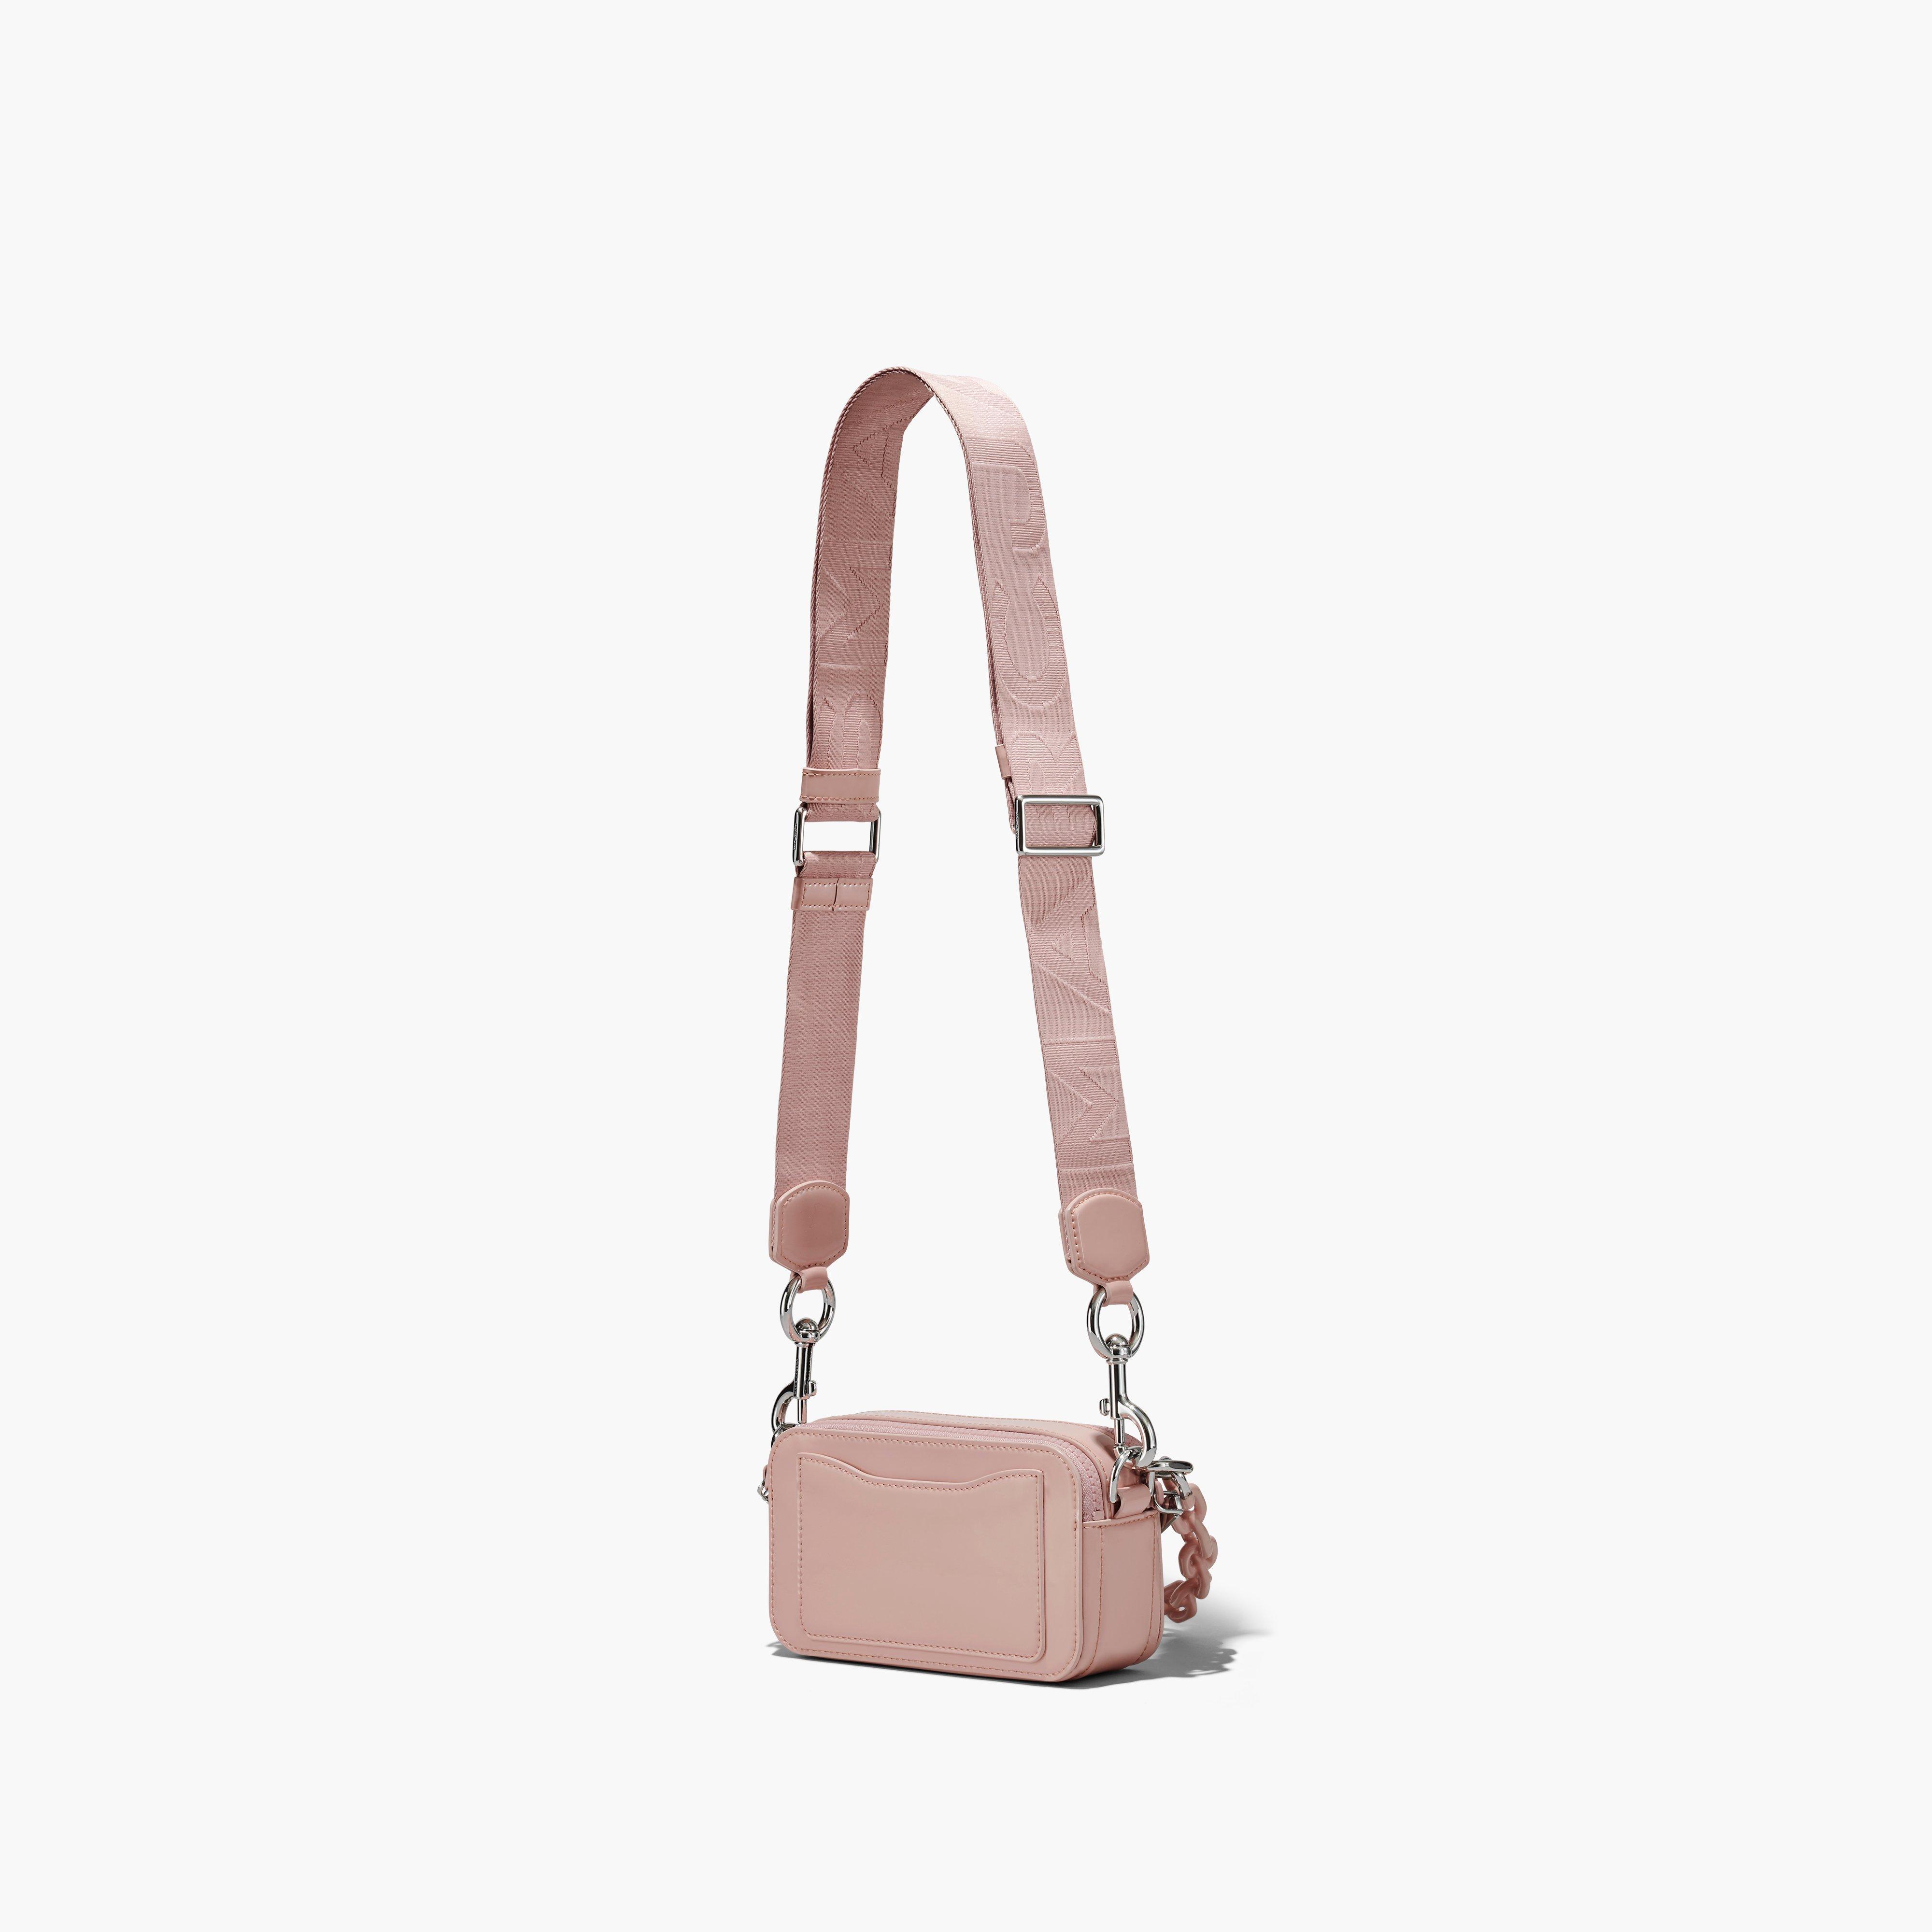 Marc Jacobs The Patent Leather Snapshot Bag at Von Maur